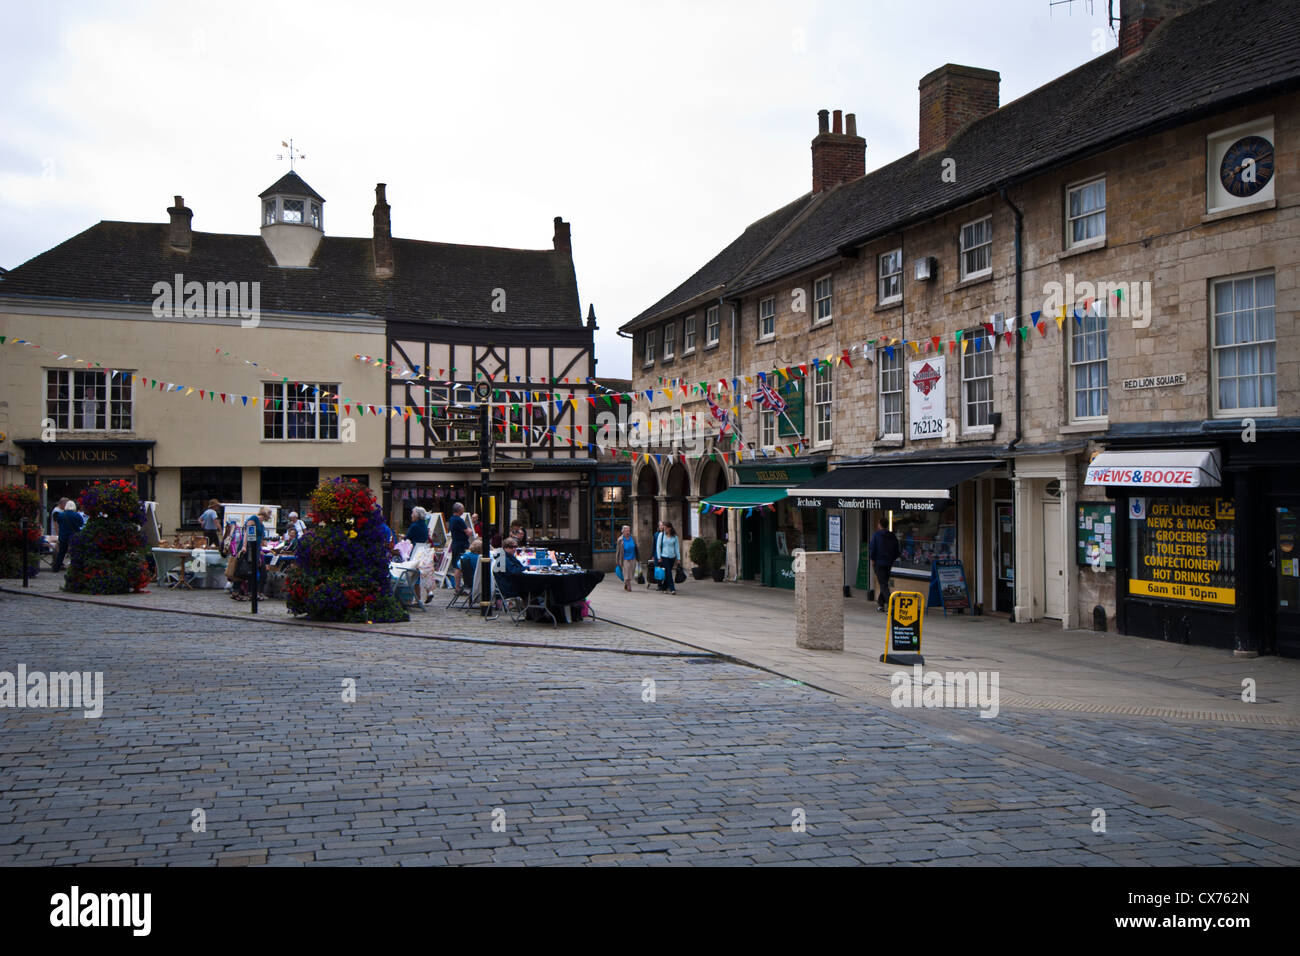 Arts and crafts market, Red Lion Square, Stamford, Lincolnshire, England, UK. Stock Photo